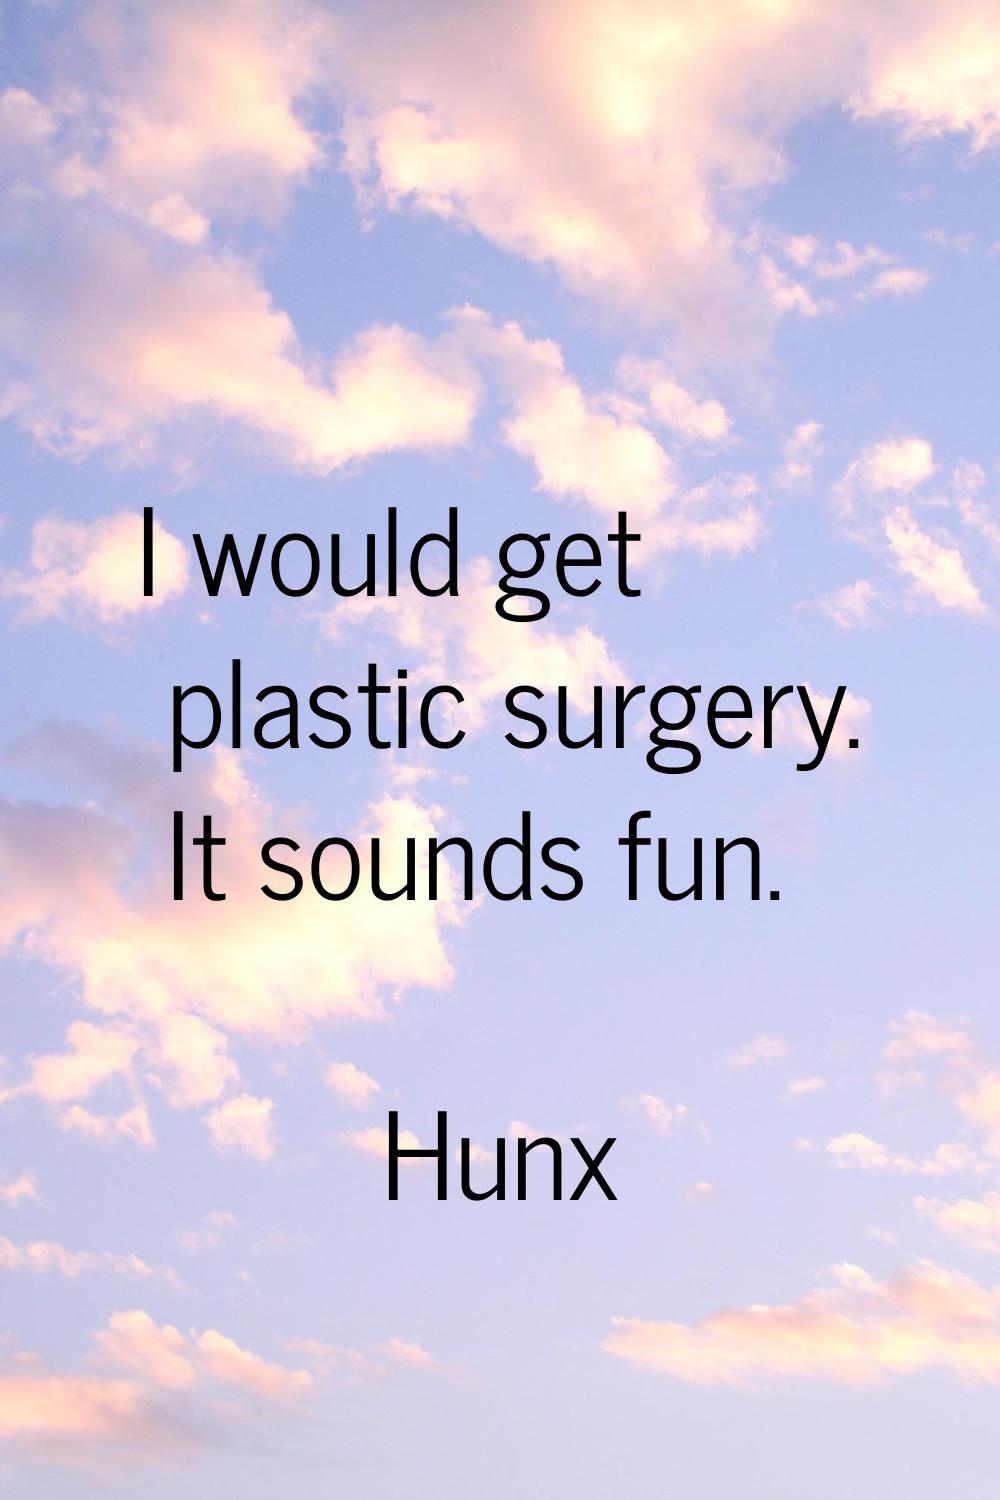 I would get plastic surgery. It sounds fun.